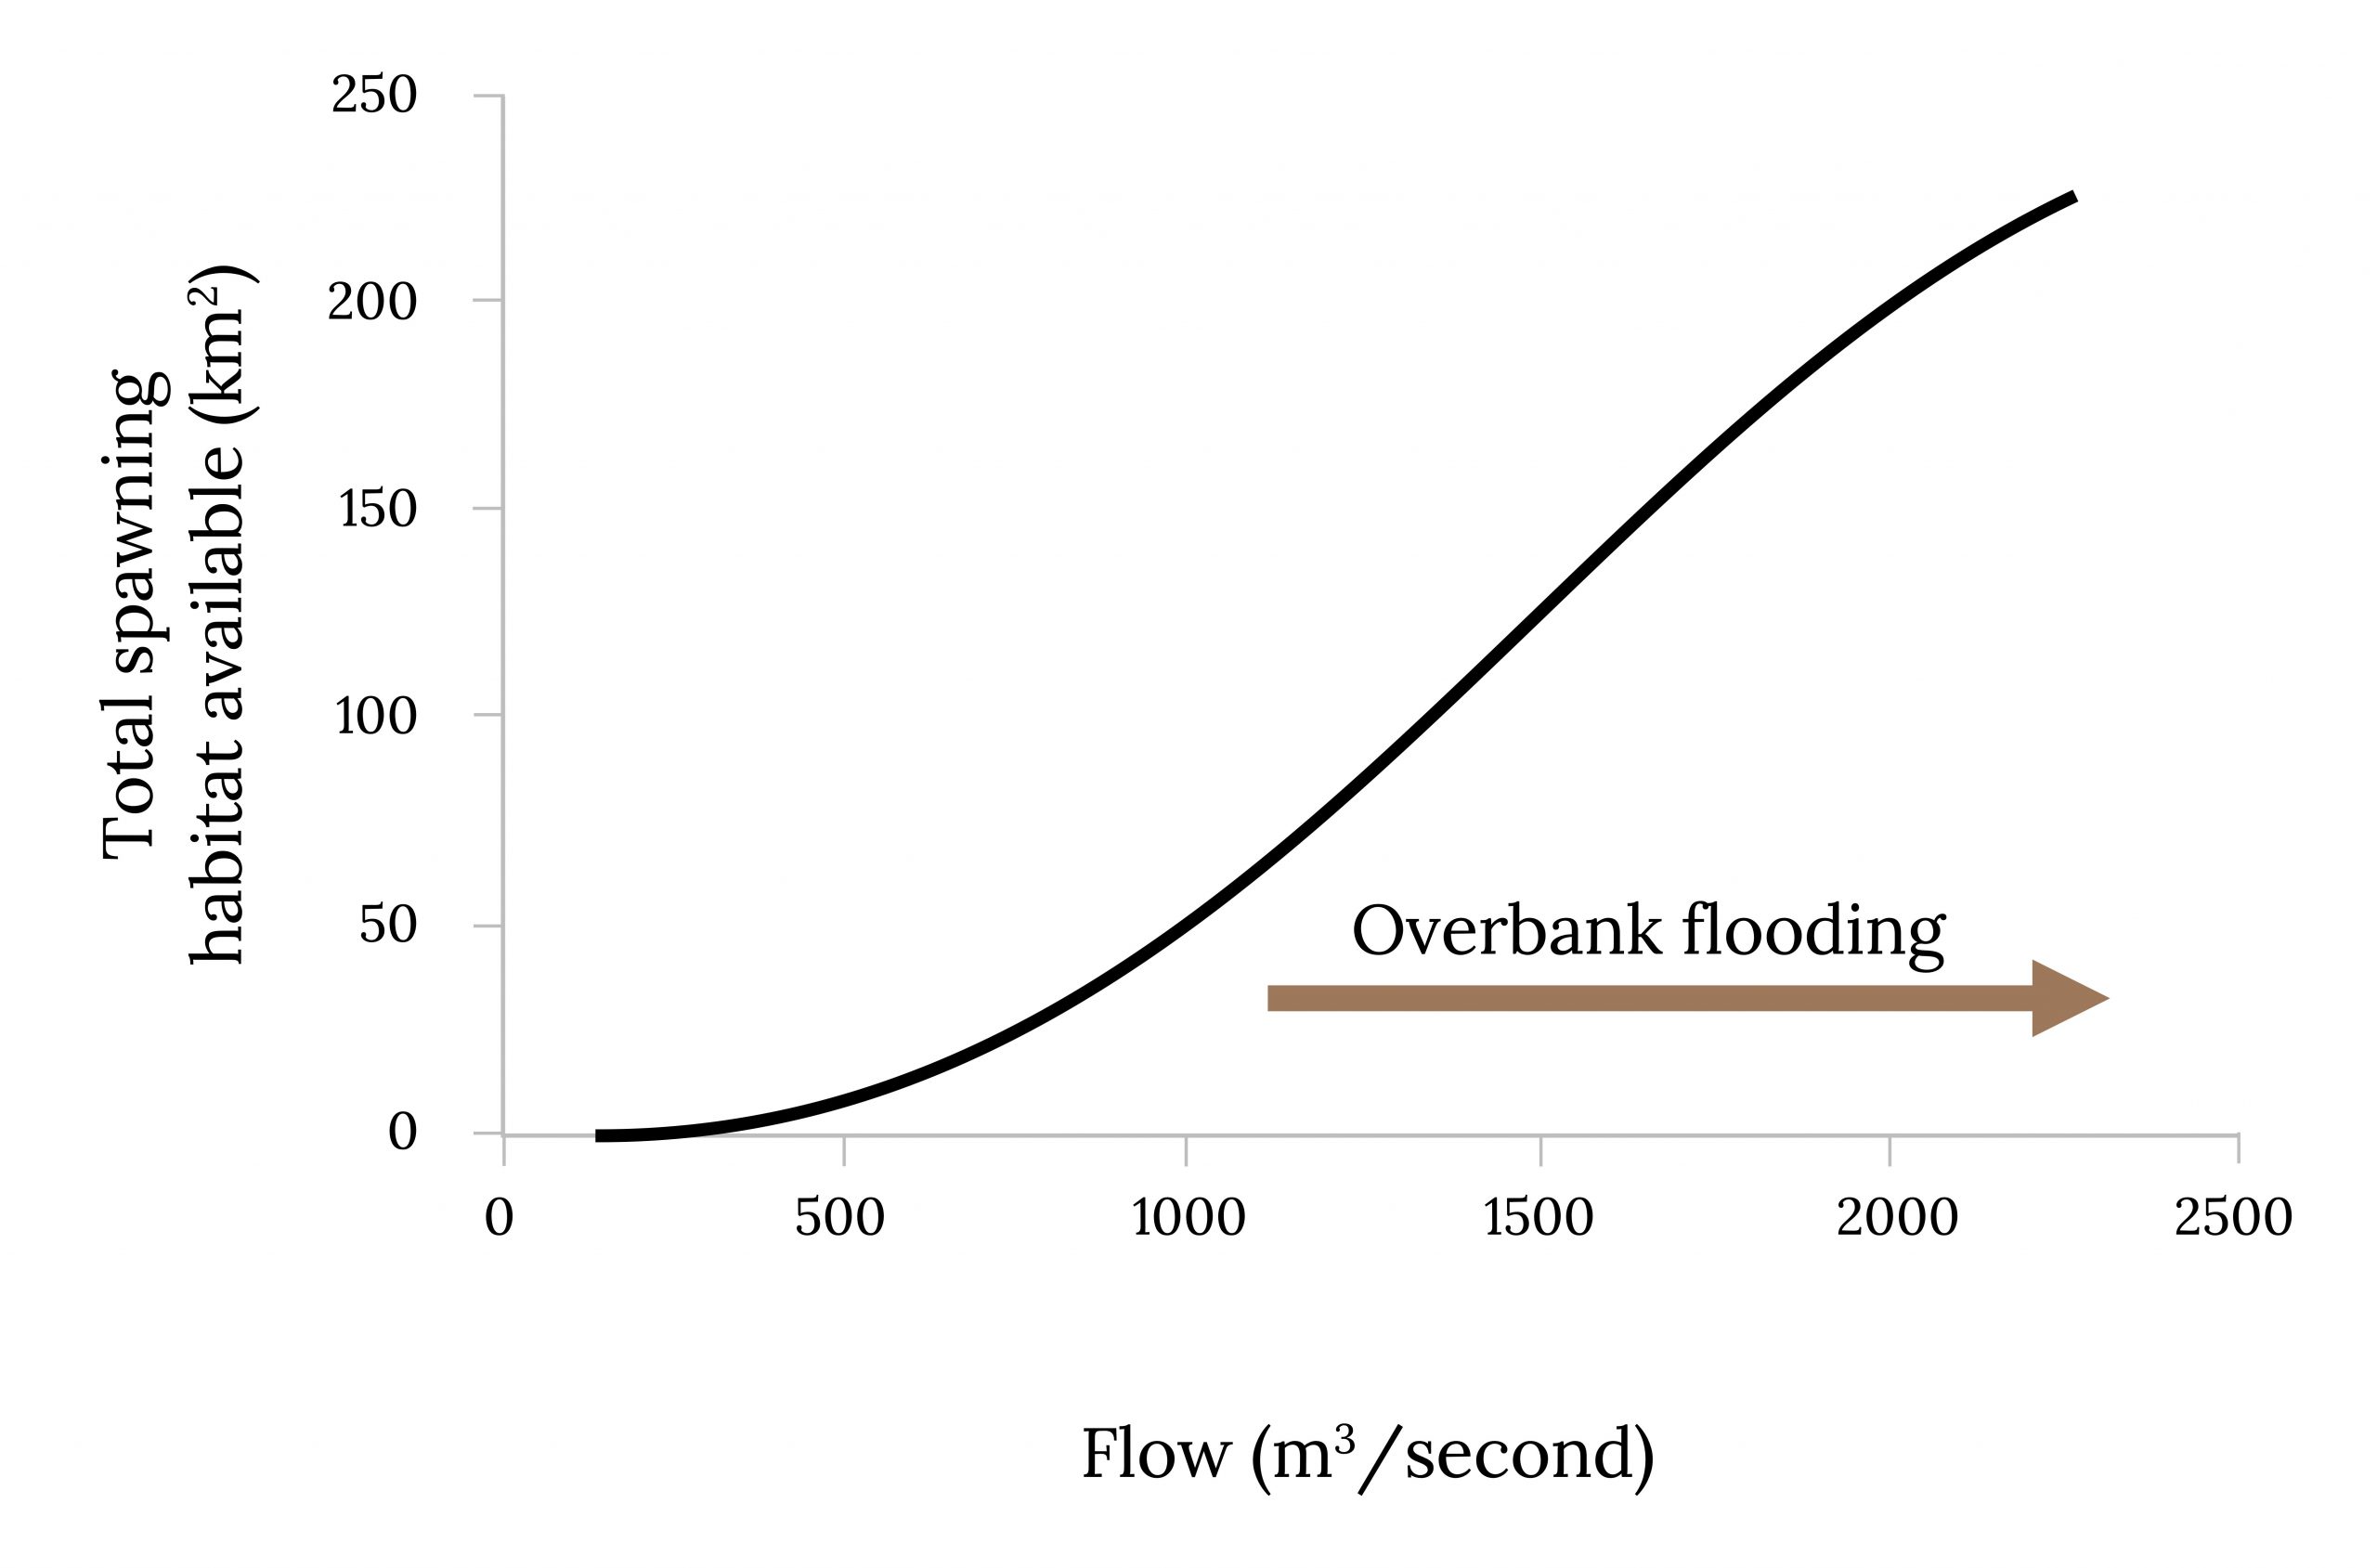 Sigmoid curve shows increase in spawning habitat with flow and overbank flooding